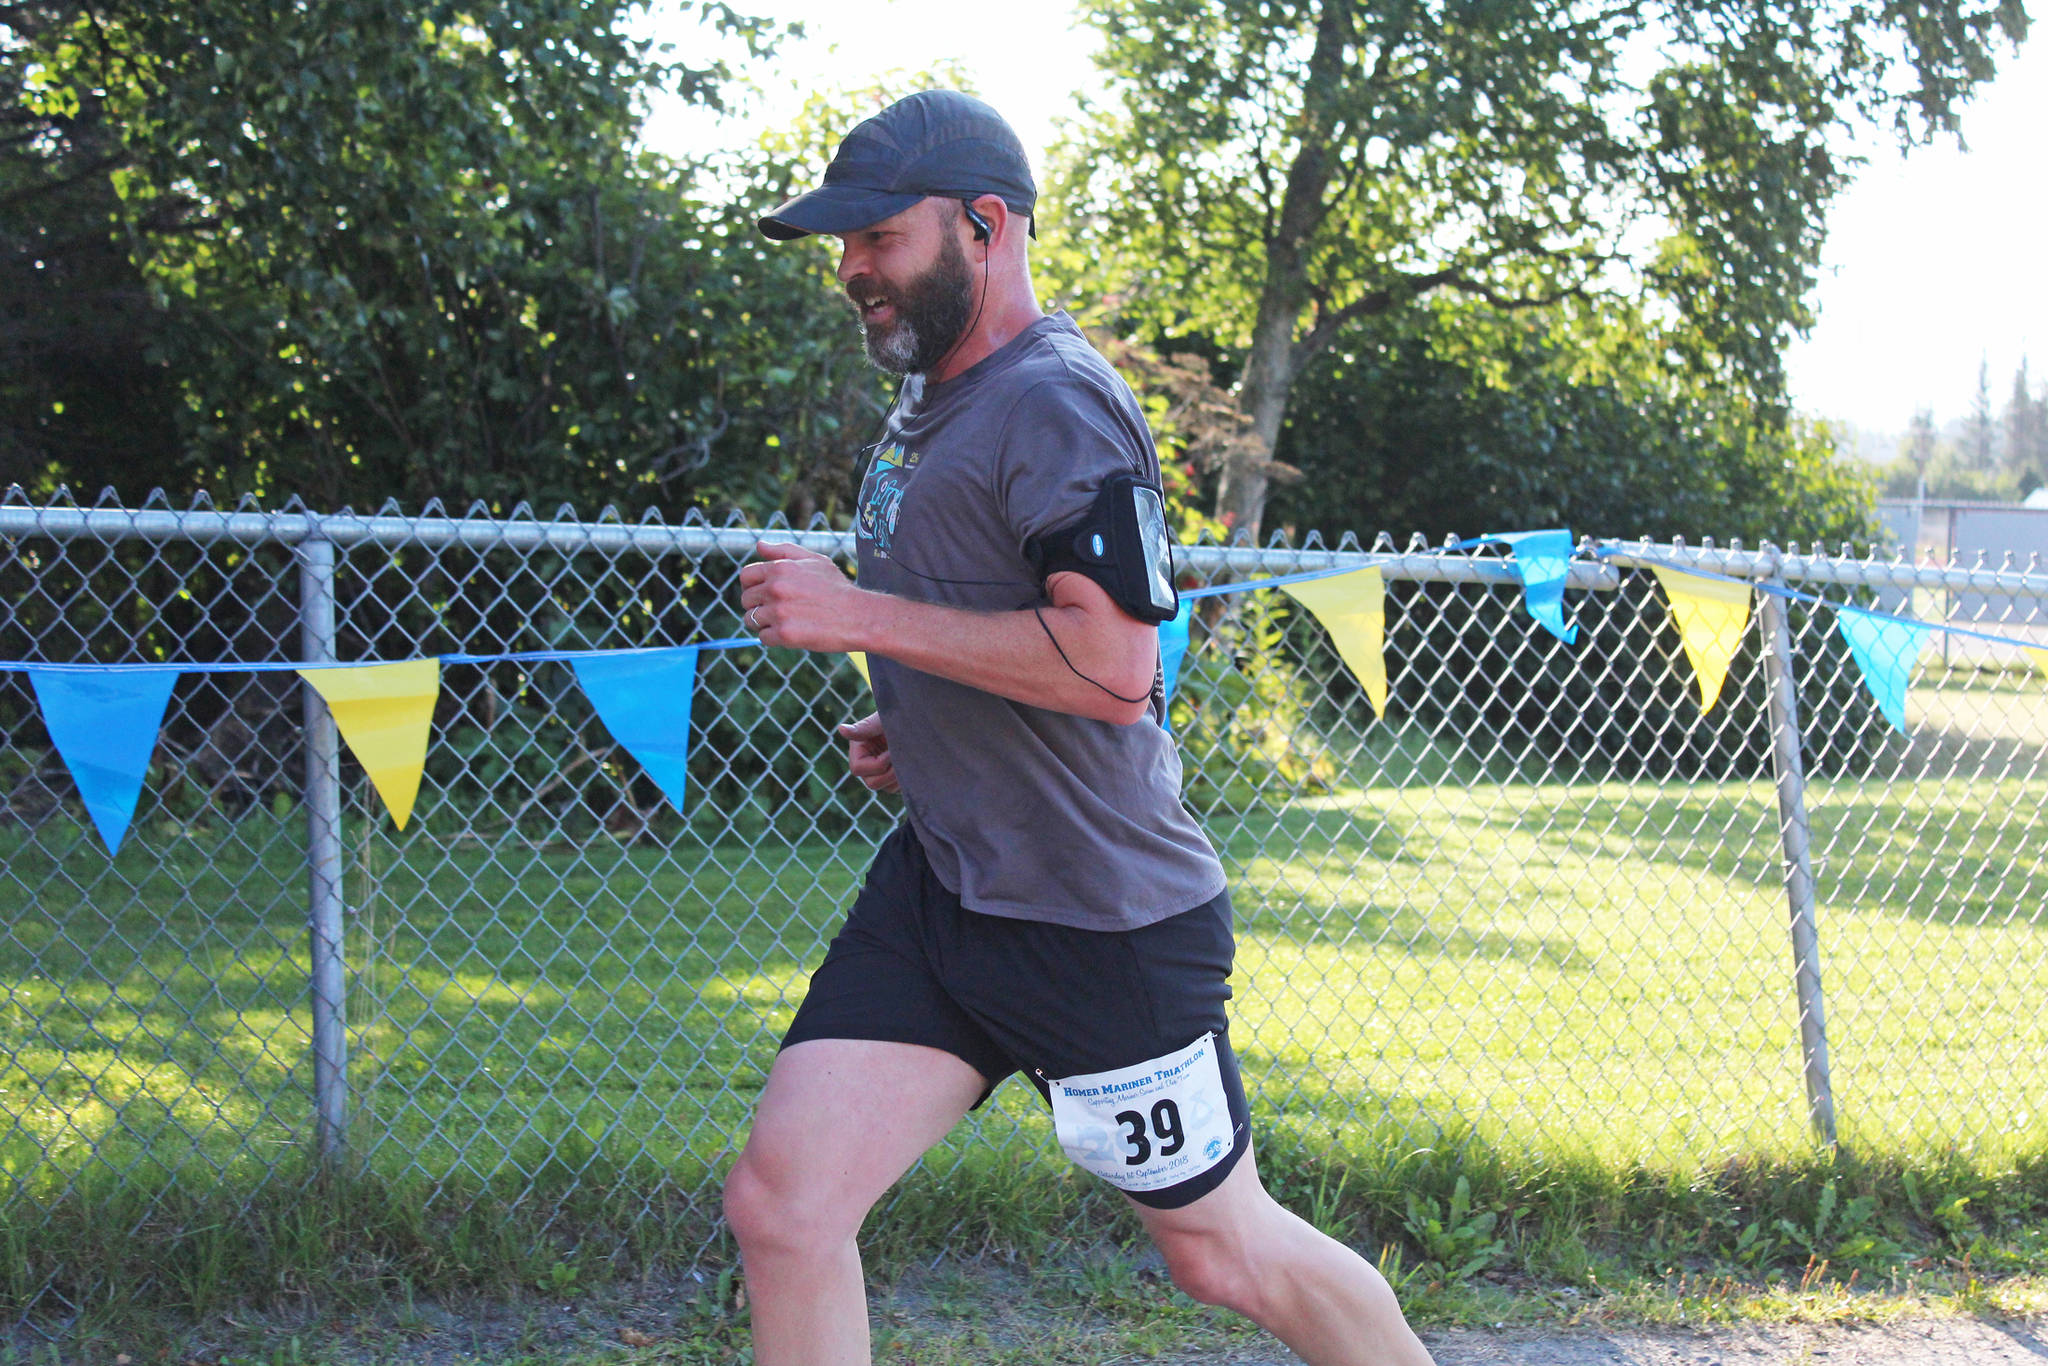 Sean Campbell reaches the finish line of the Homer Mariner Triathlon on Saturday, Sept. 1, 2018 at Homer High School in Homer, Alaska. He completed the running leg of the race for his team, Gutzler’s Return. (Photo by Megan Pacer/Homer News)